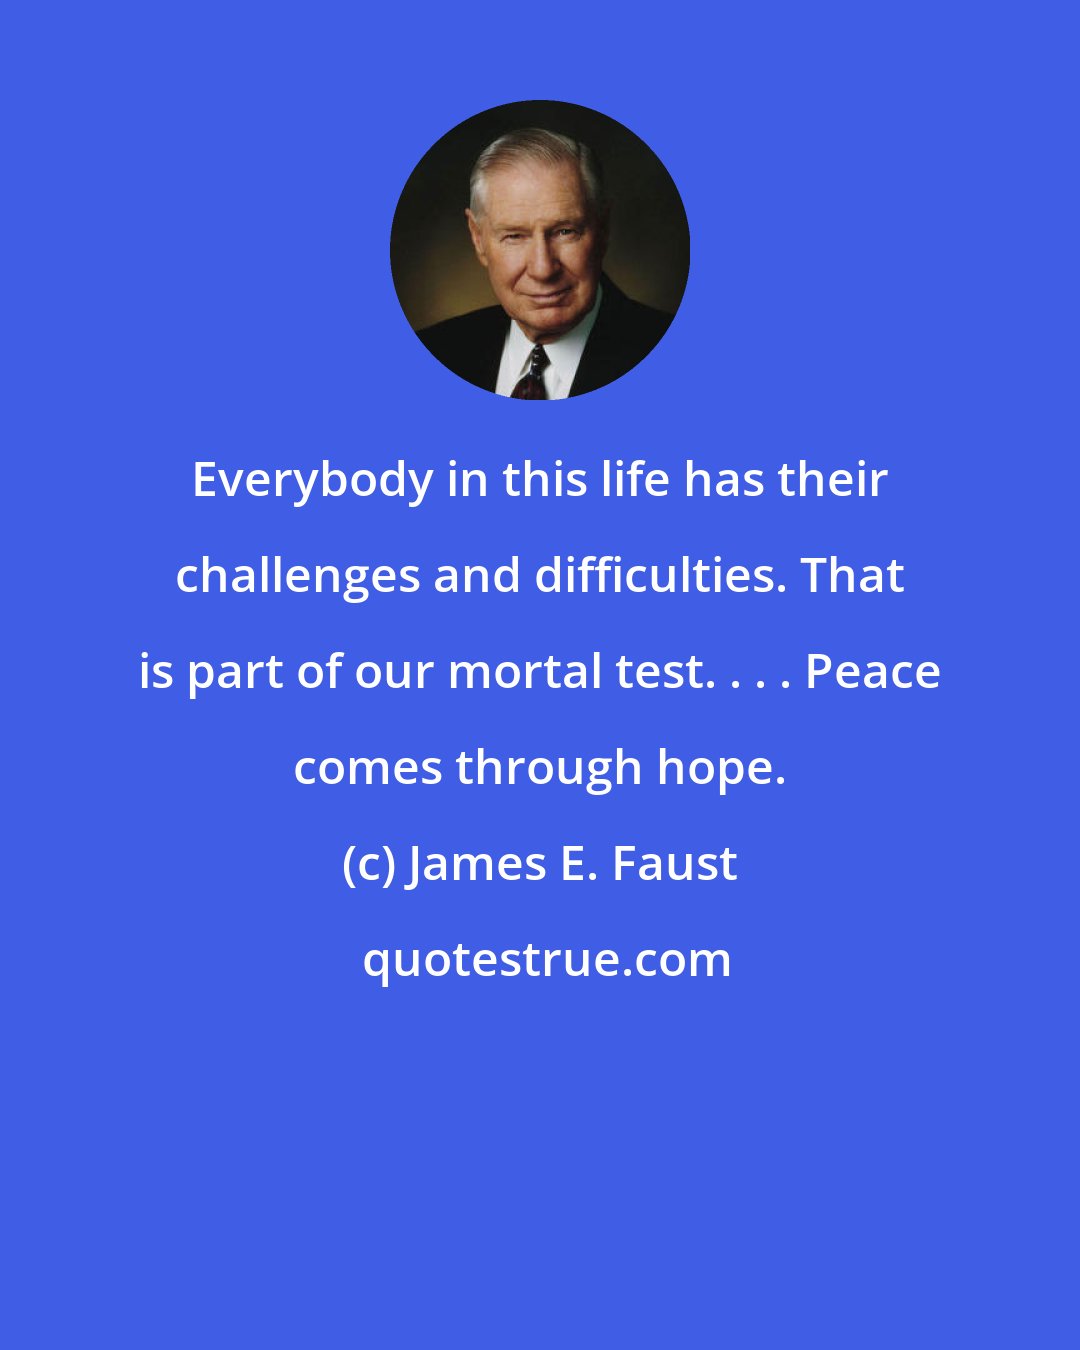 James E. Faust: Everybody in this life has their challenges and difficulties. That is part of our mortal test. . . . Peace comes through hope.